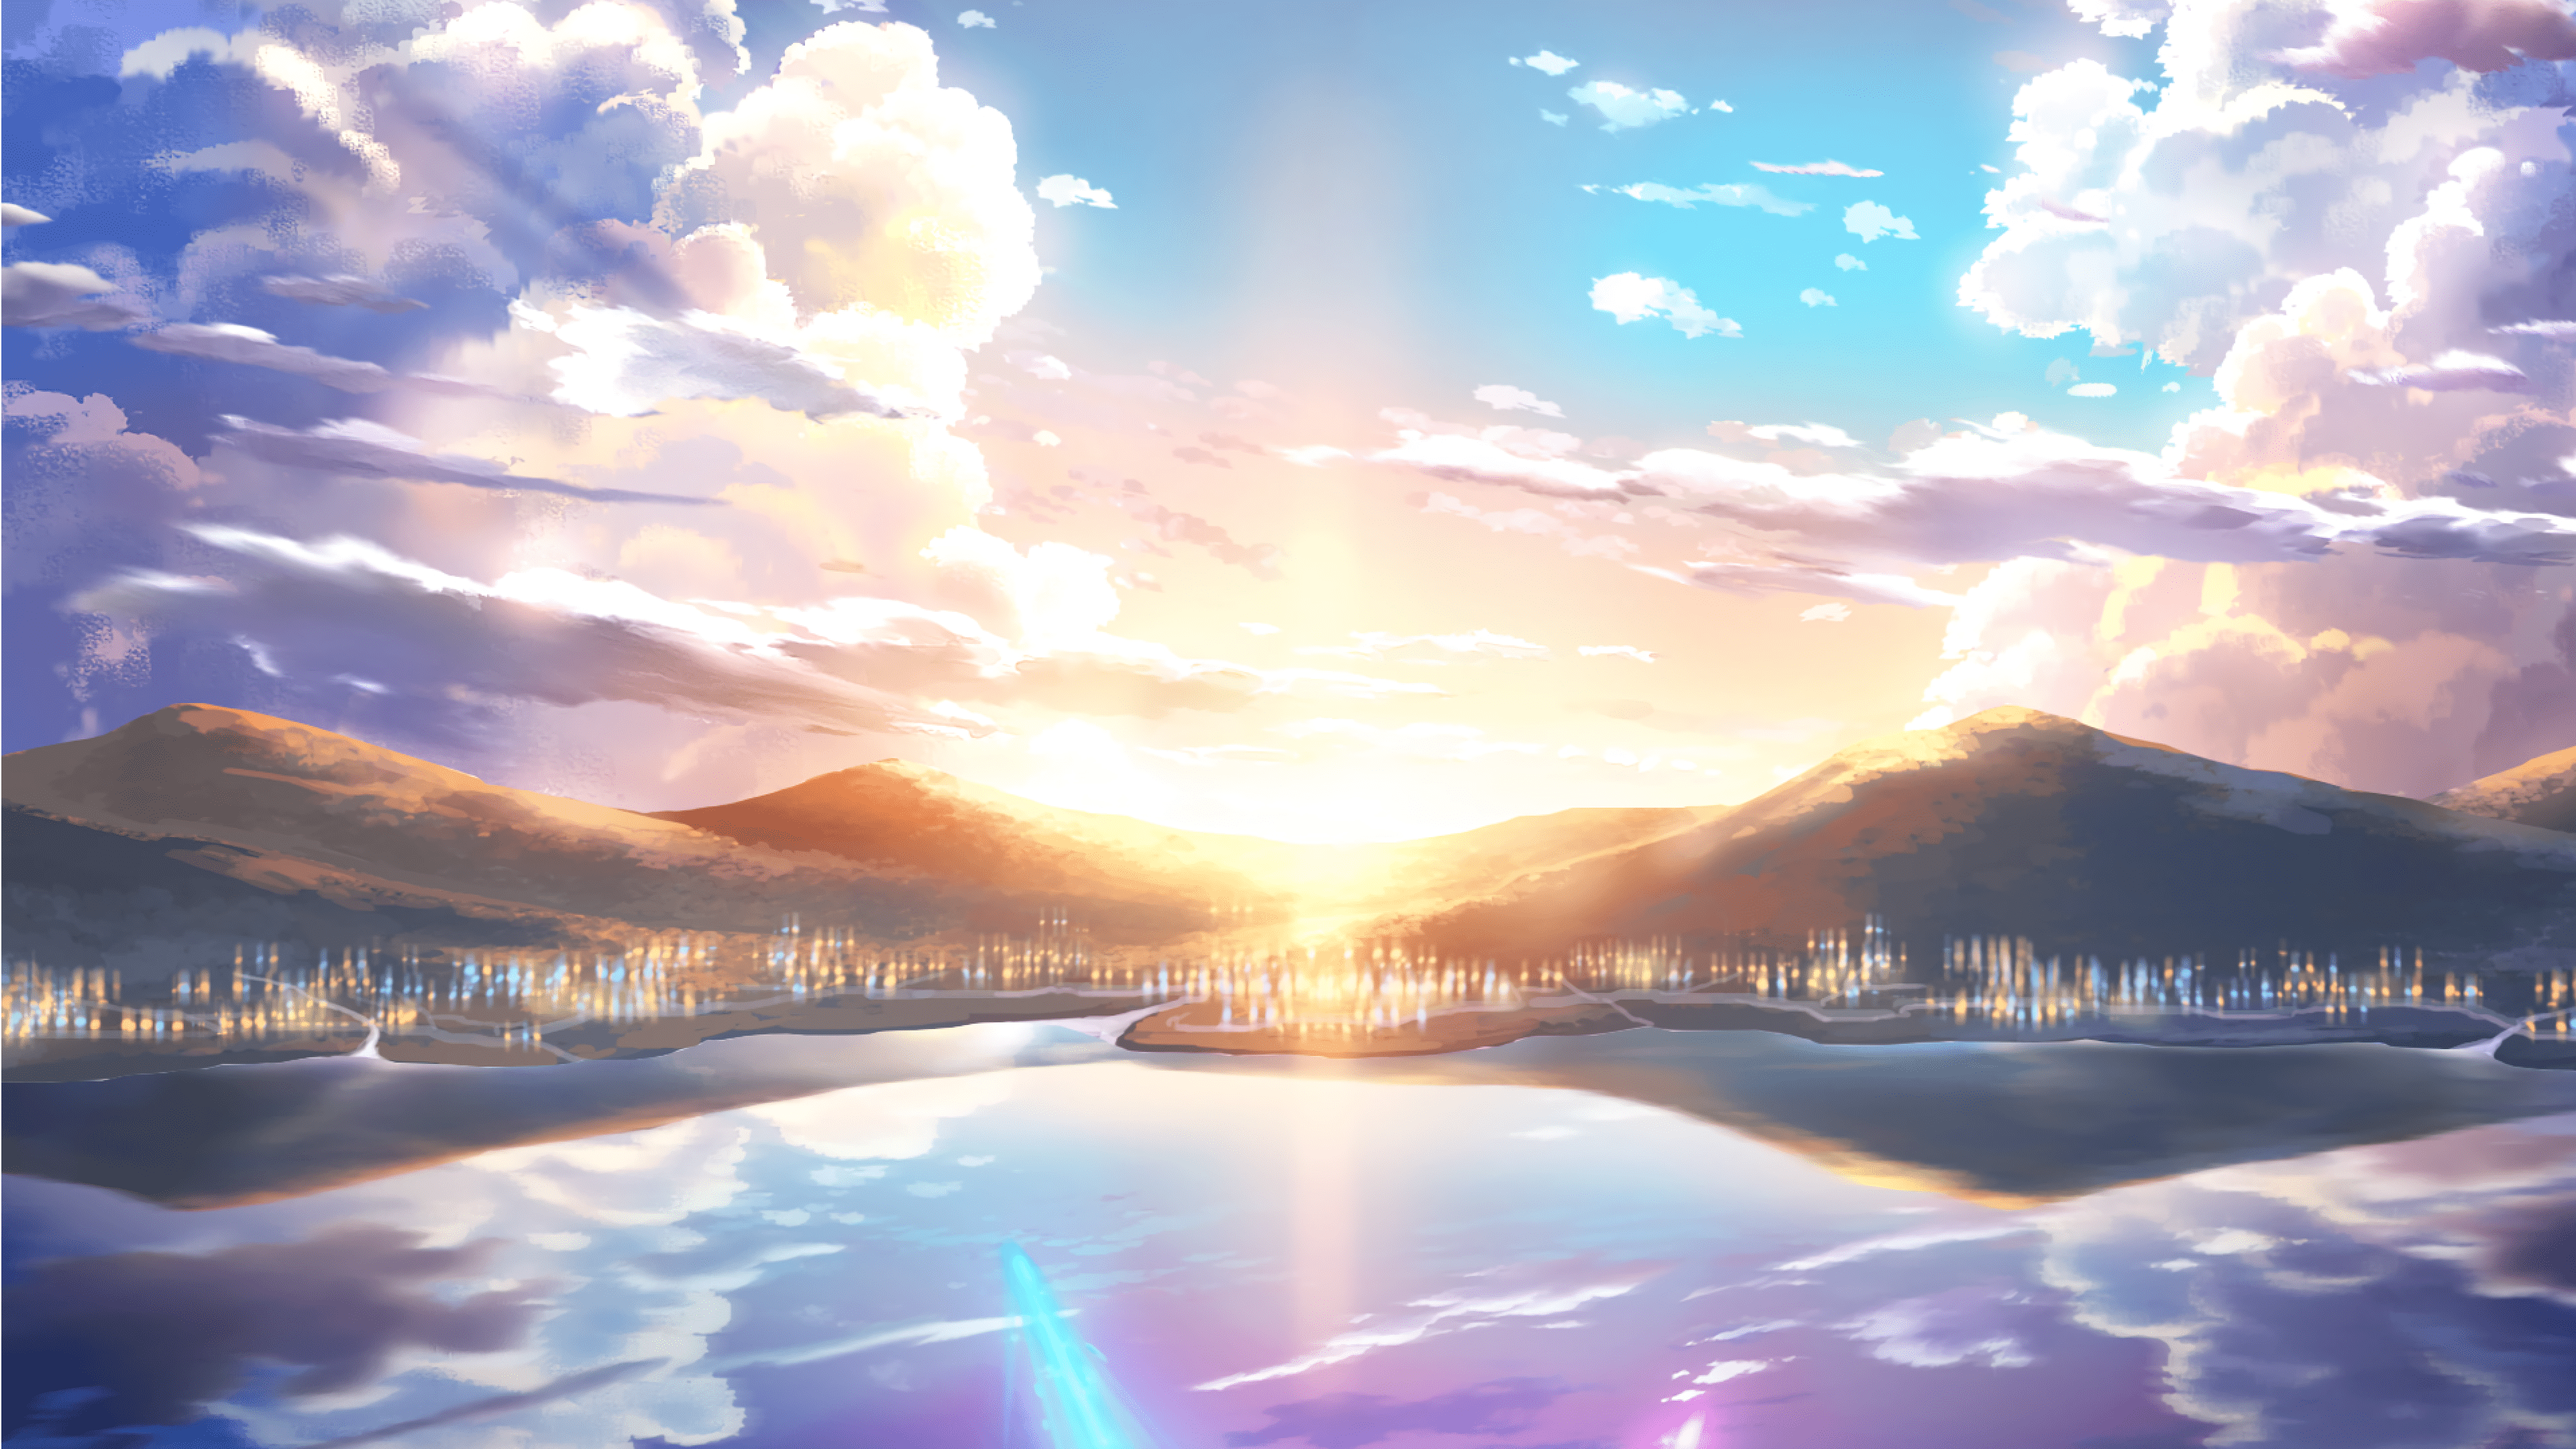 Your Name 4k HD Wallpapers - Top Free Your Name 4k HD Backgrounds - WallpaperAccess